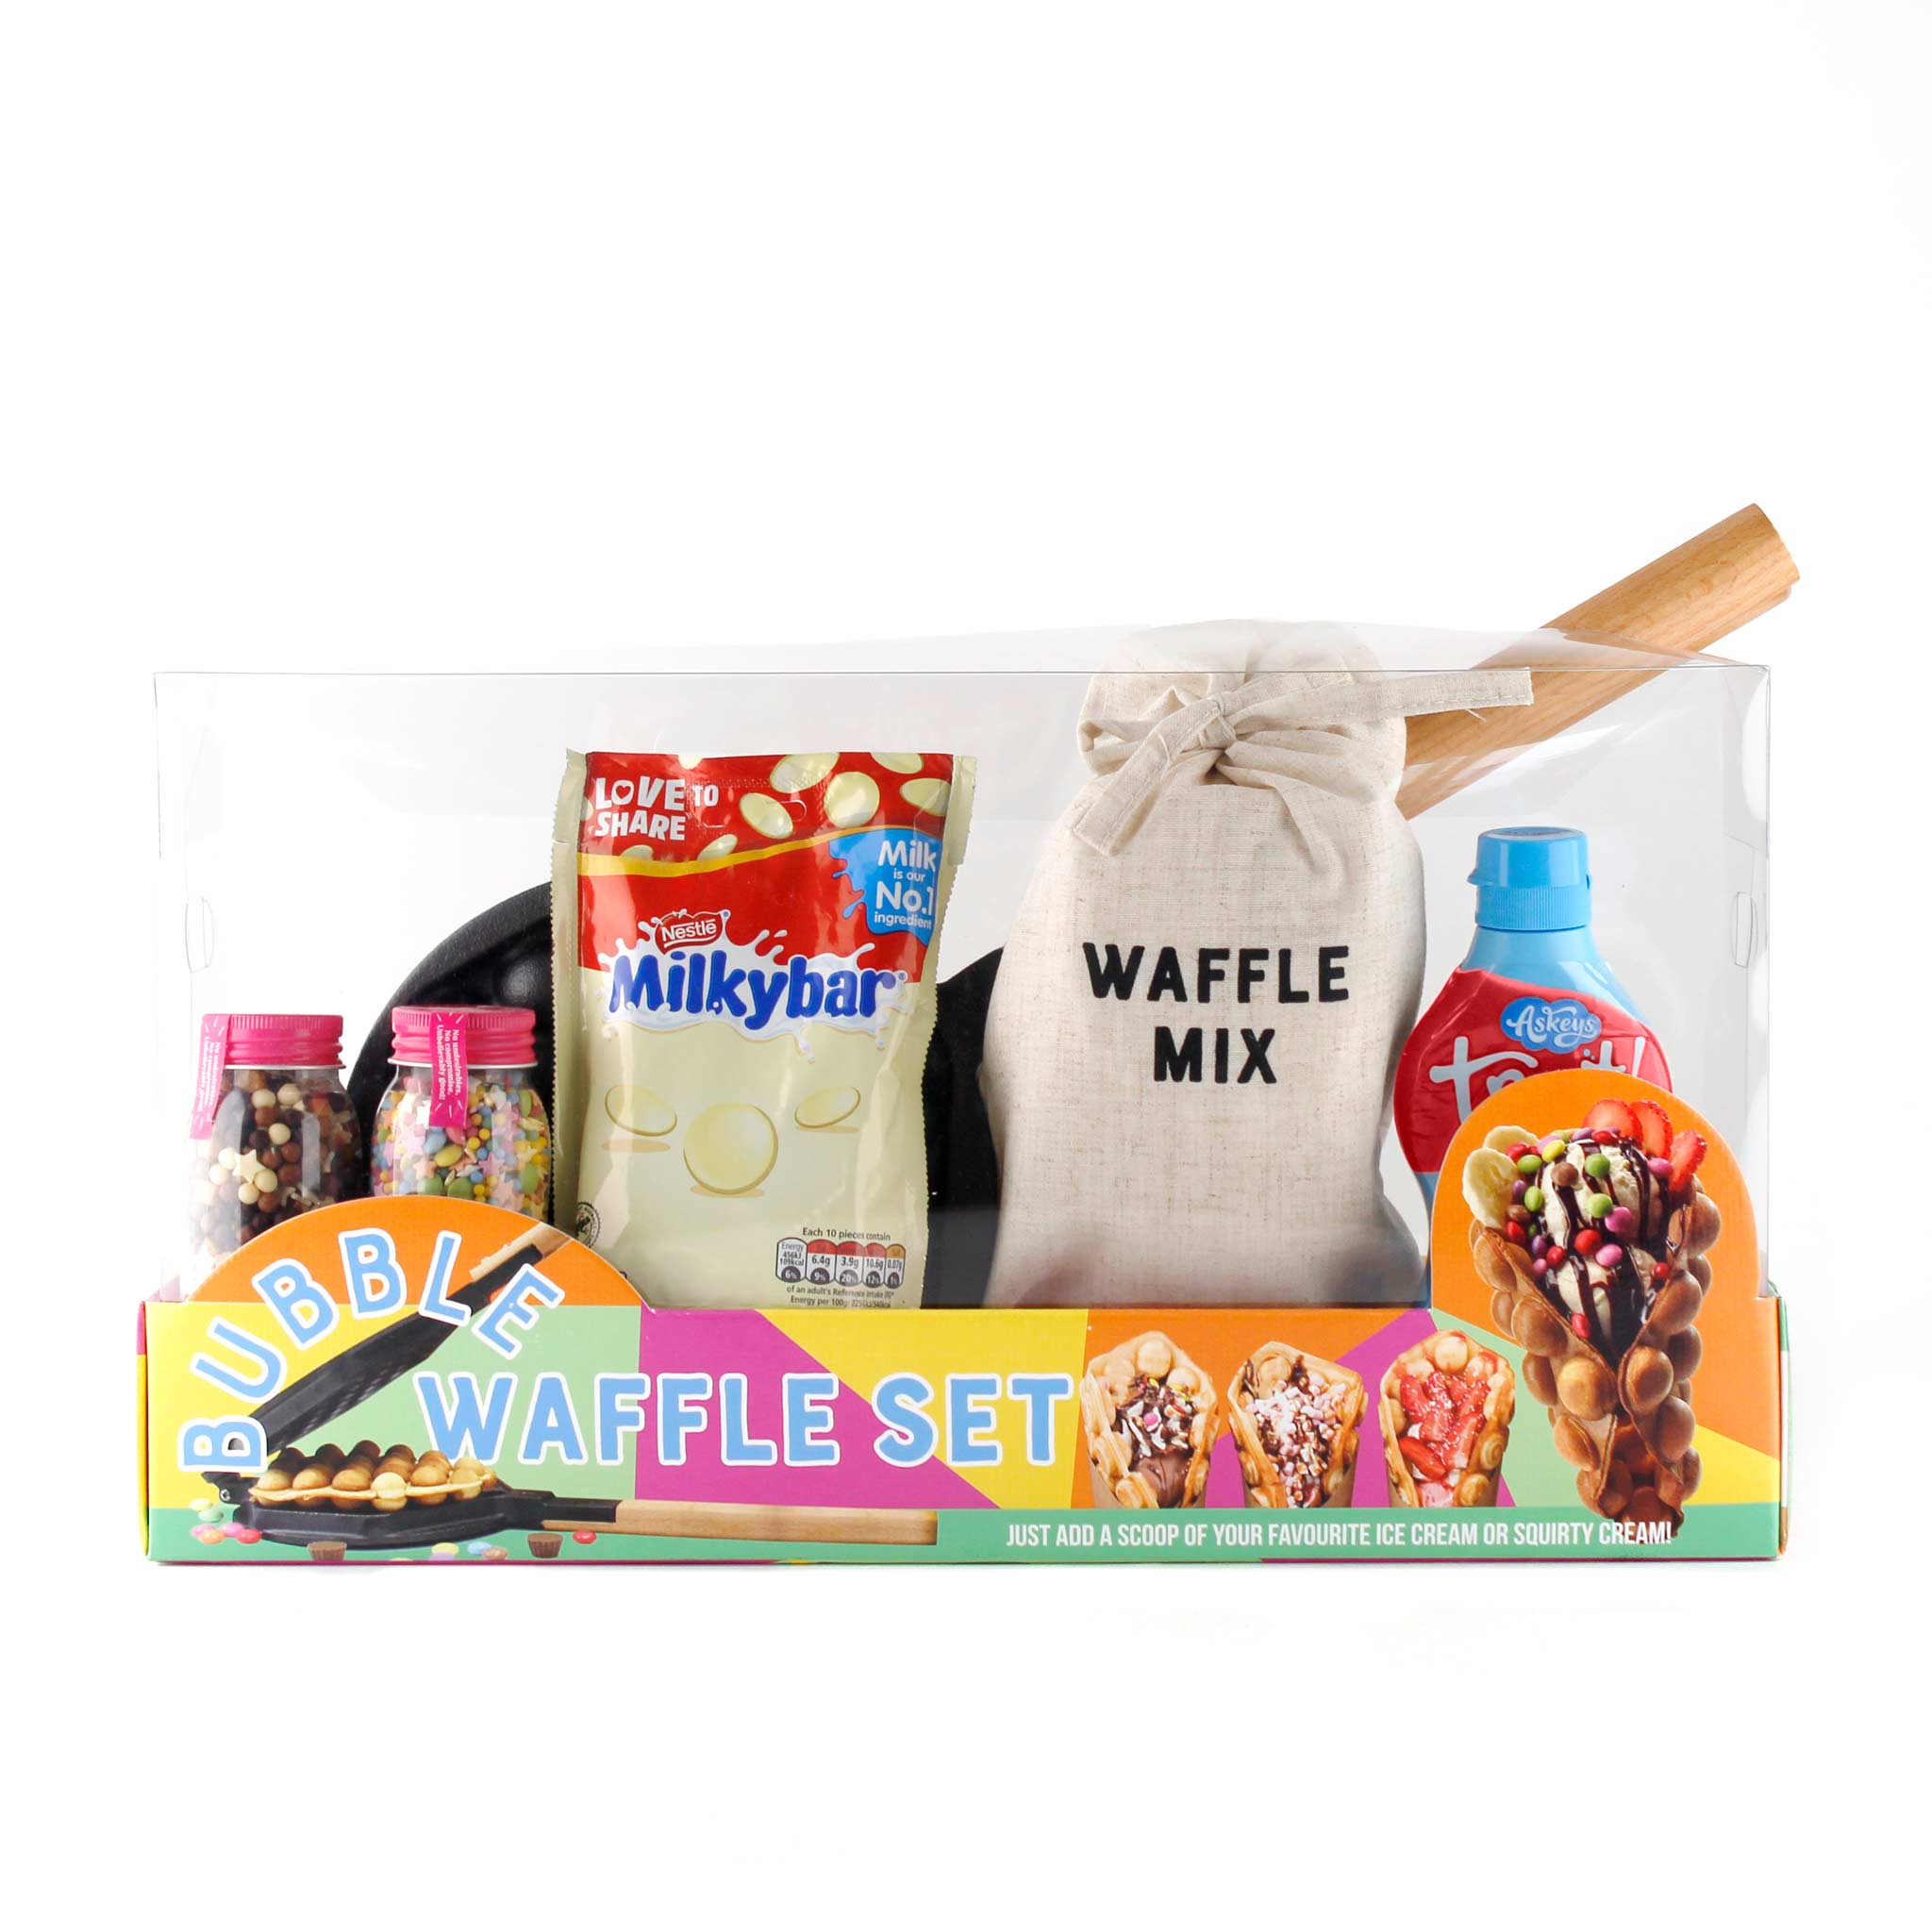 Milkybar and strawberry bubble waffle gift set by china blue